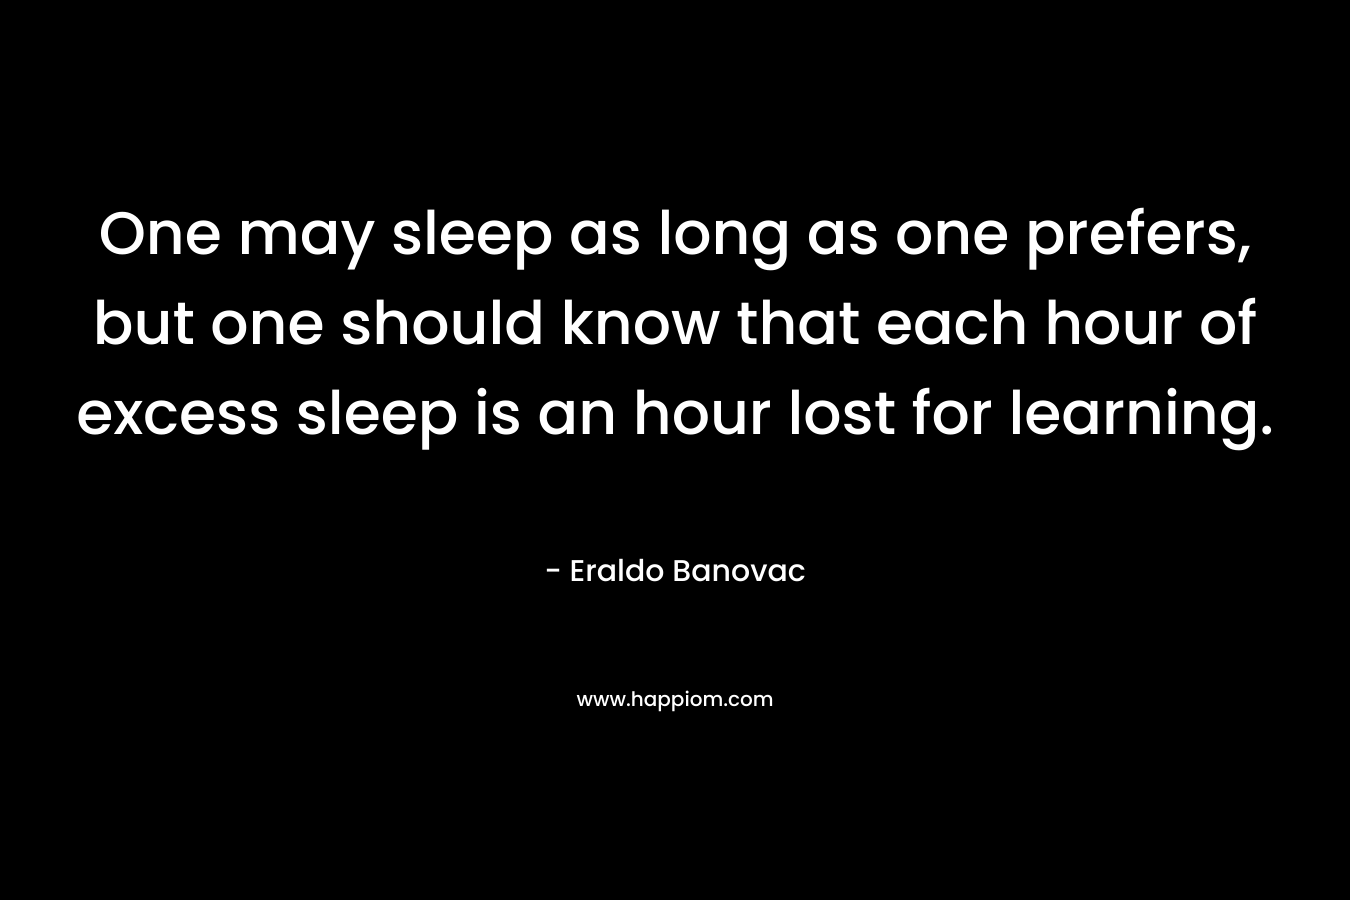 One may sleep as long as one prefers, but one should know that each hour of excess sleep is an hour lost for learning. – Eraldo Banovac